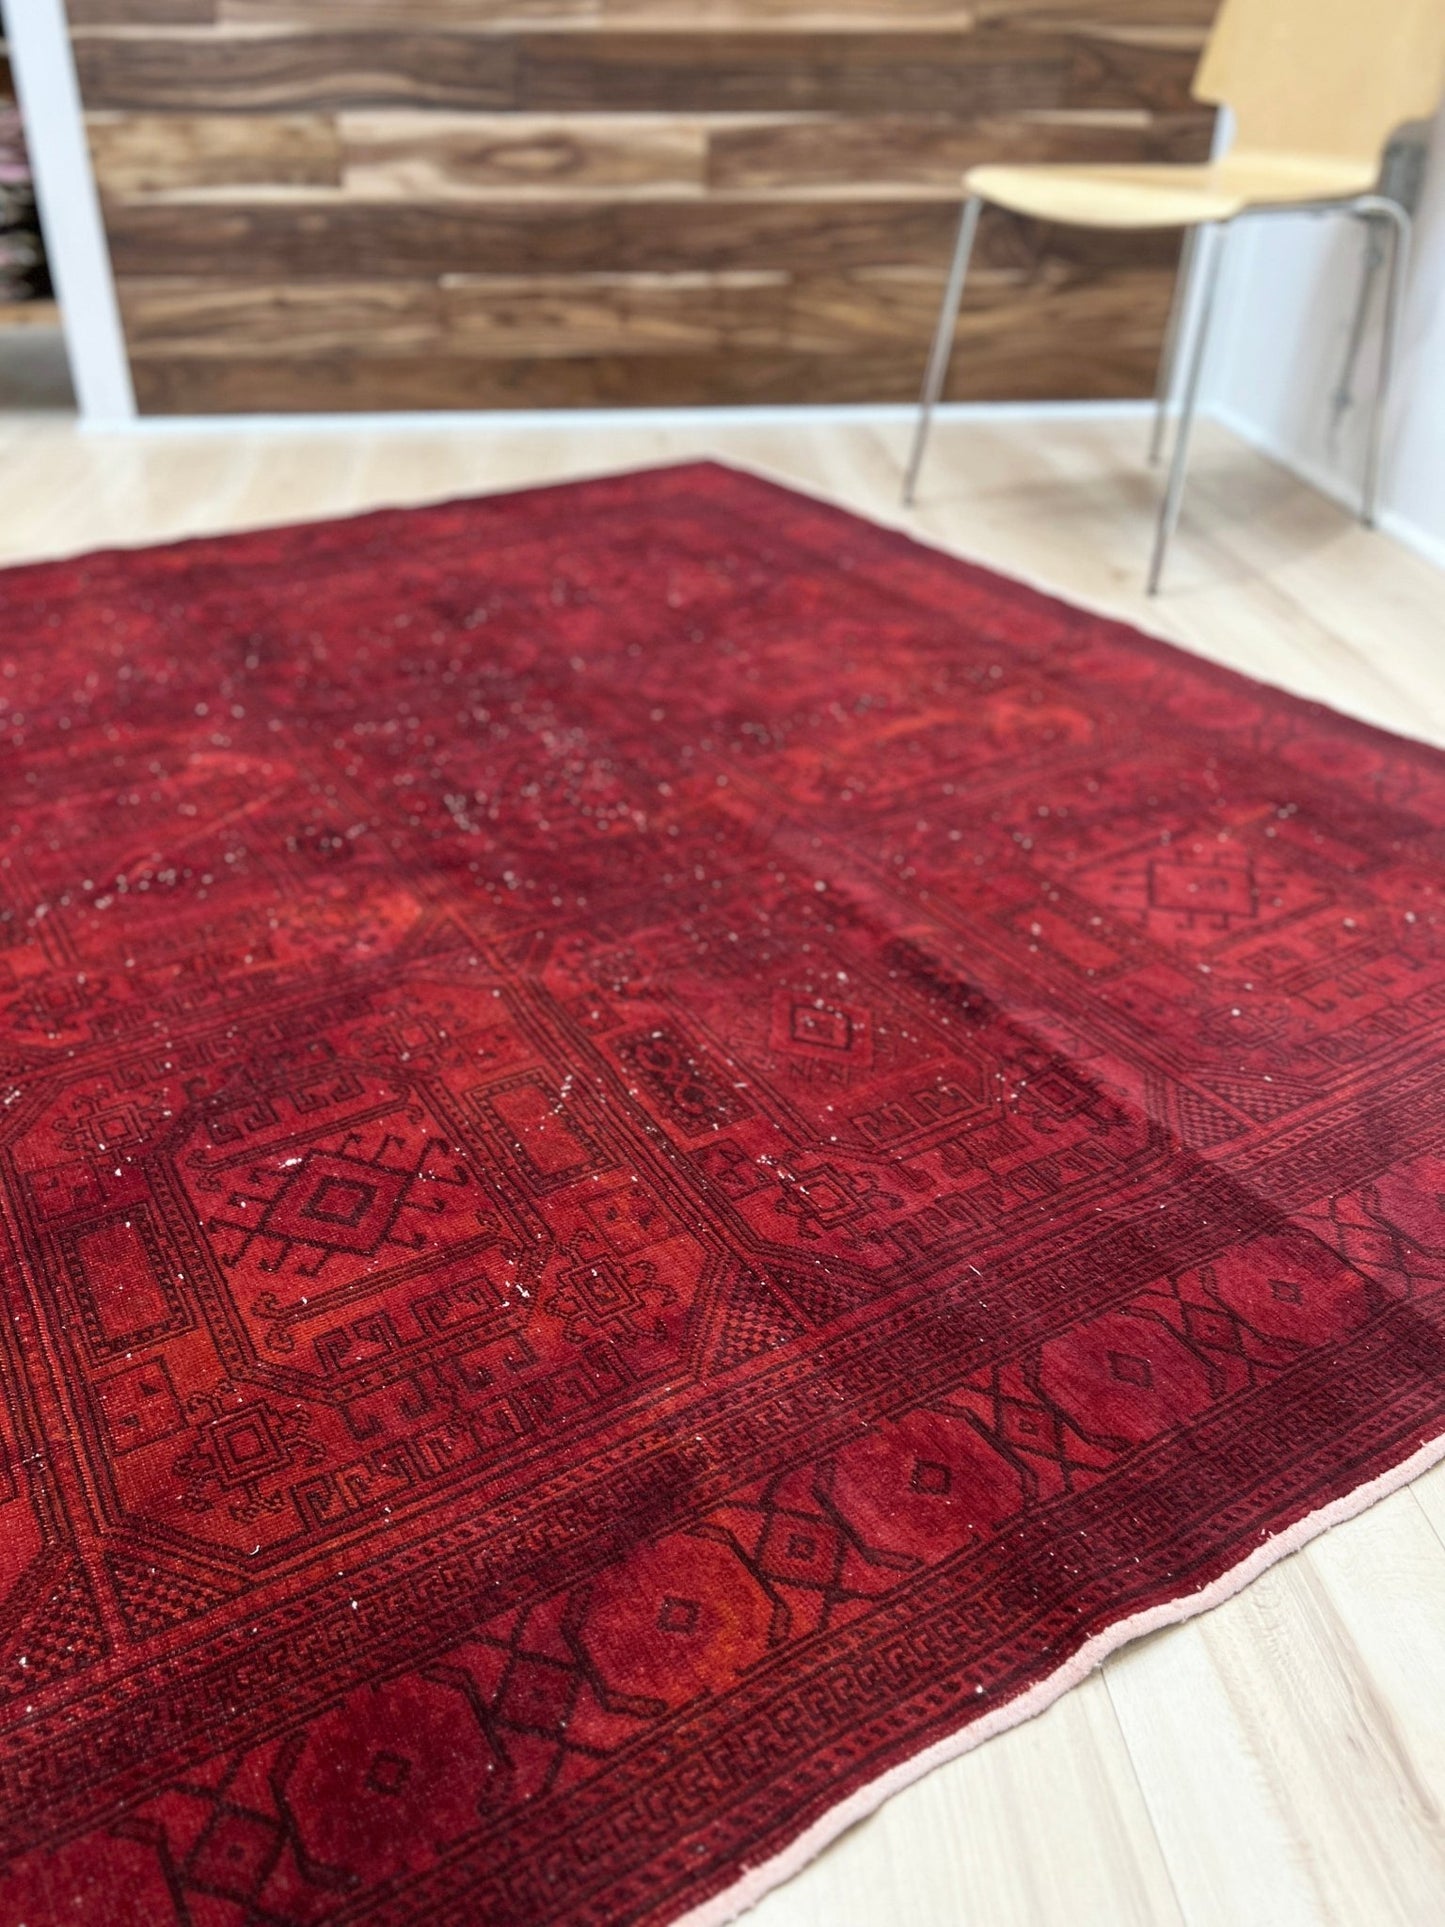 Large red overdyed handmade wool turkish rug San Francisco Bay Area. Buy rugs online free shipping to USA and Canada.